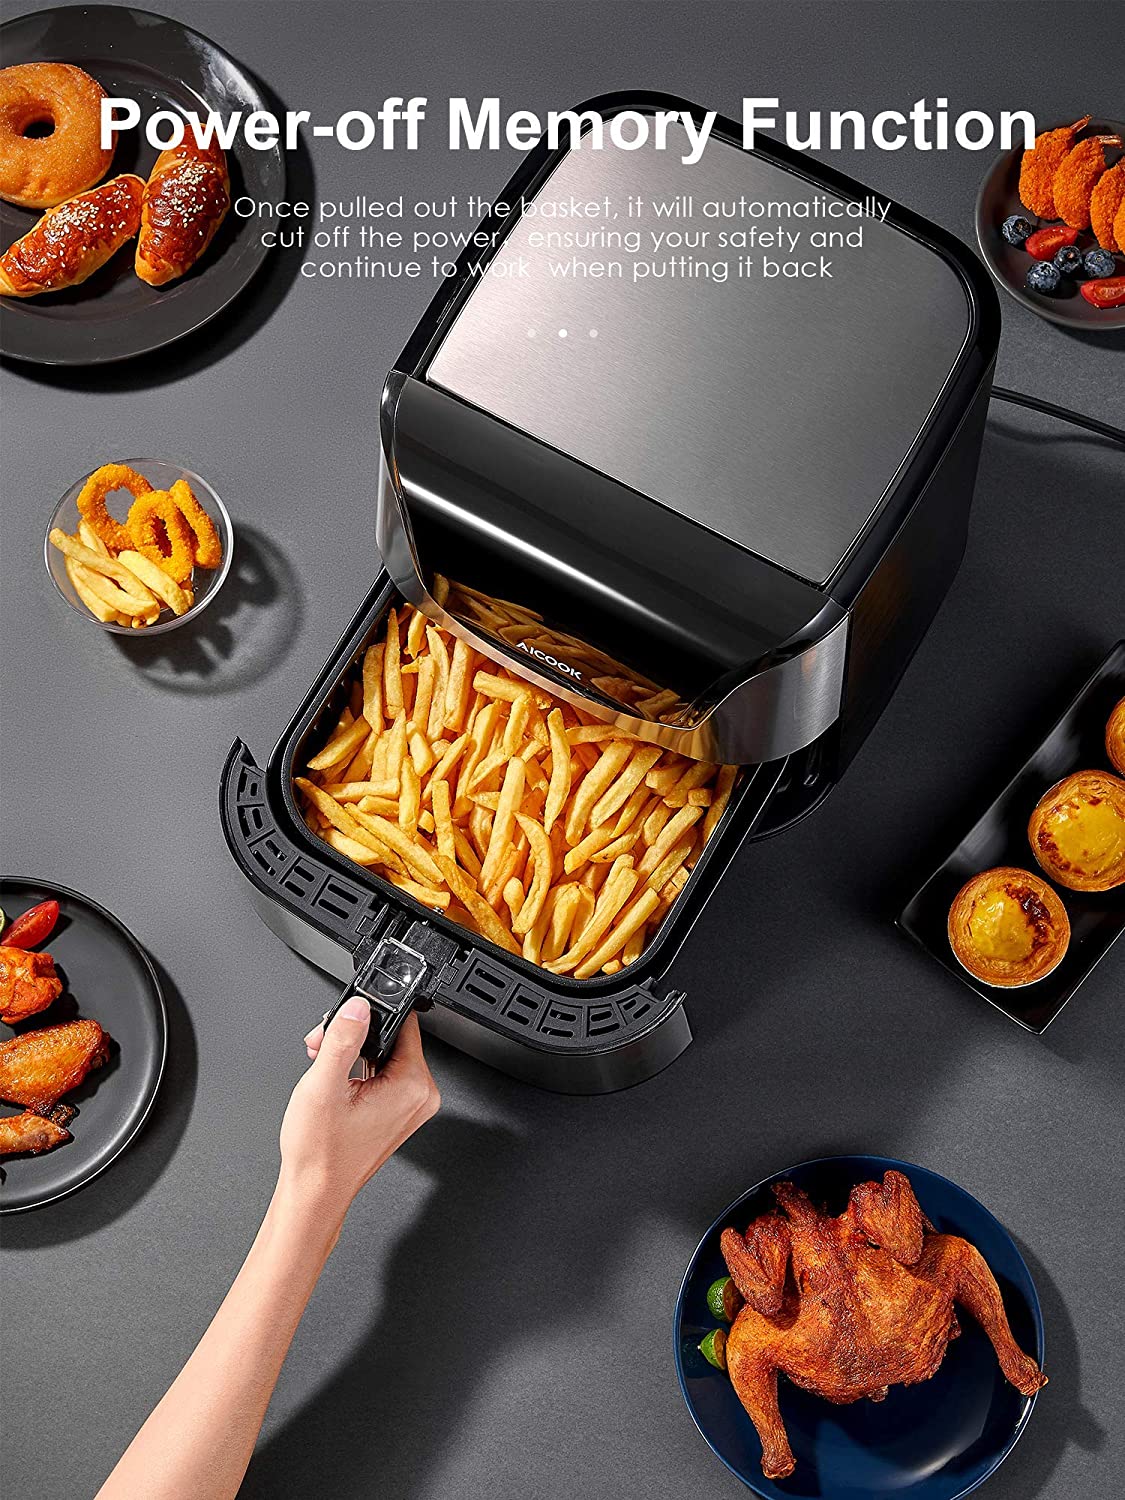 Why Choose an Air Fryer Oven? (Includes Secret Recipe) – AICOOK